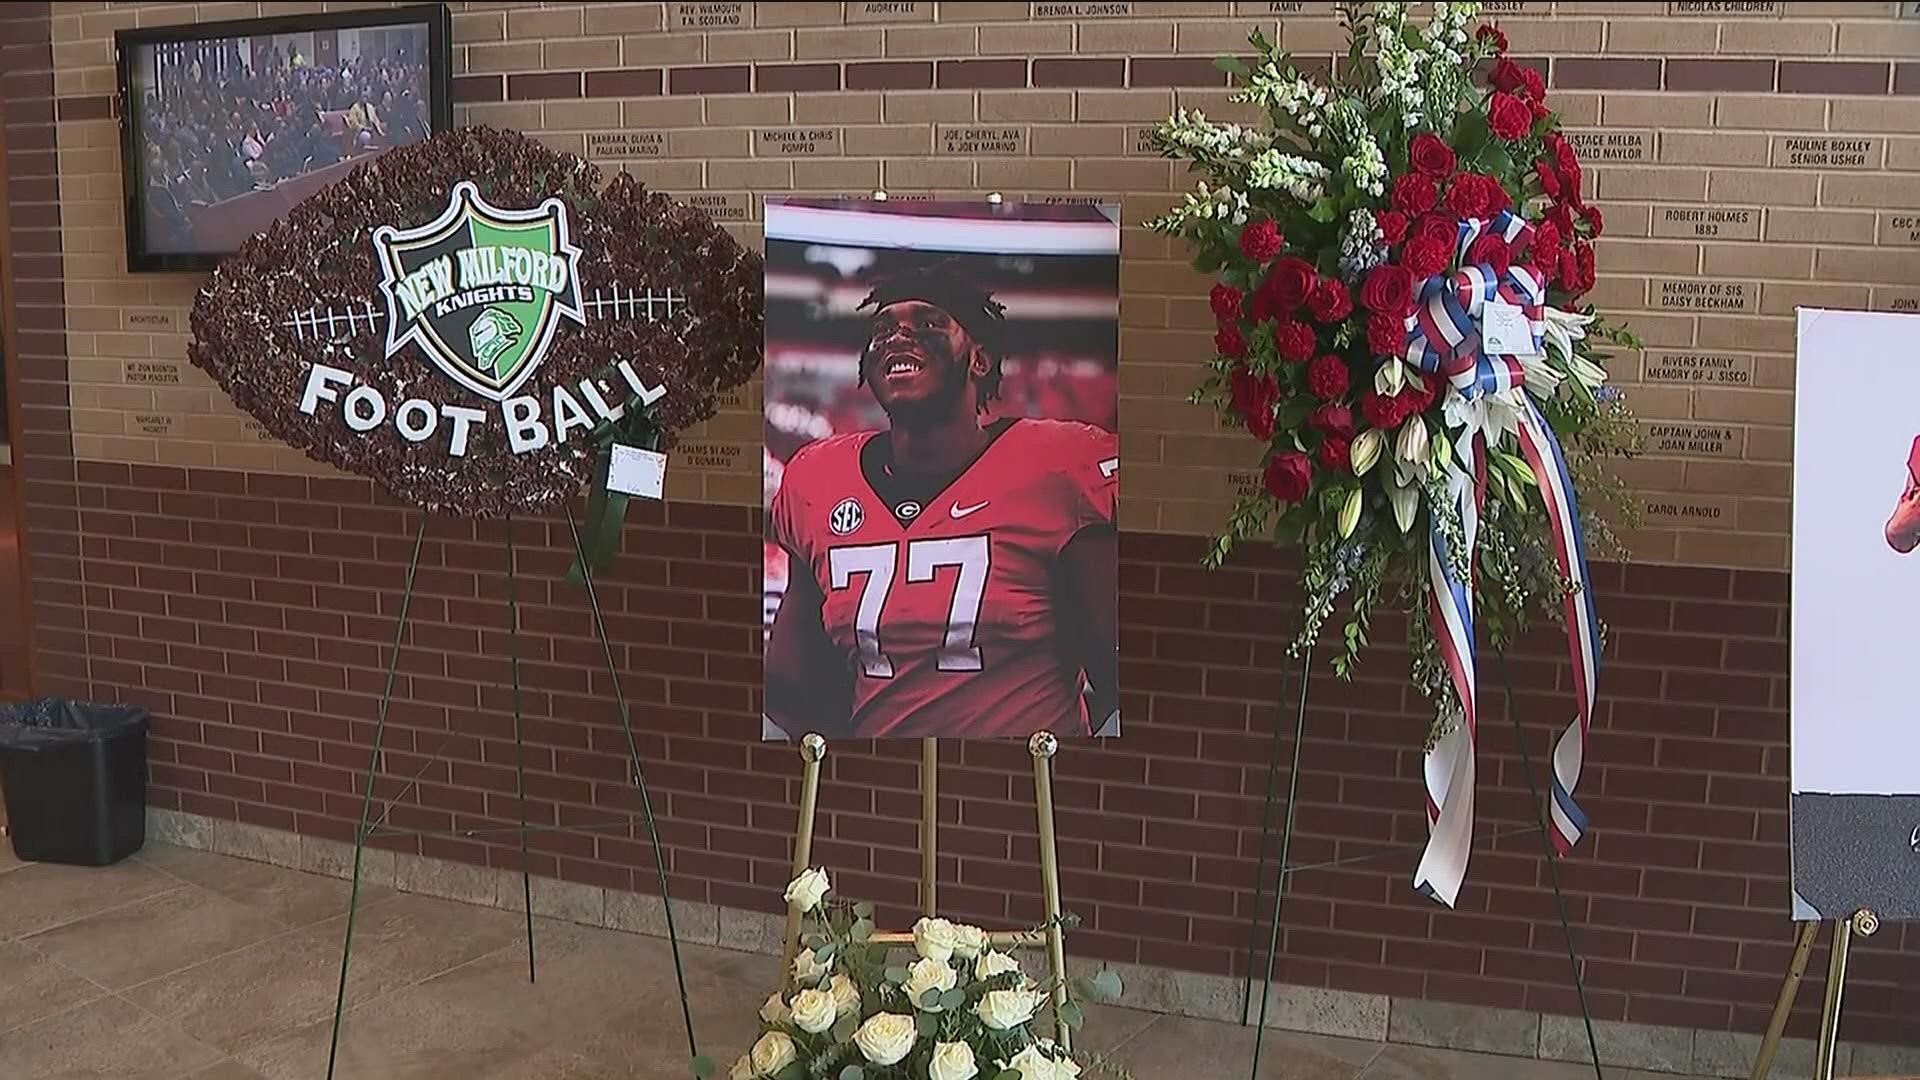 Devin Willock and Chandler LeCroy died in a car accident on Sunday morning, hours after the UGA championship celebration.